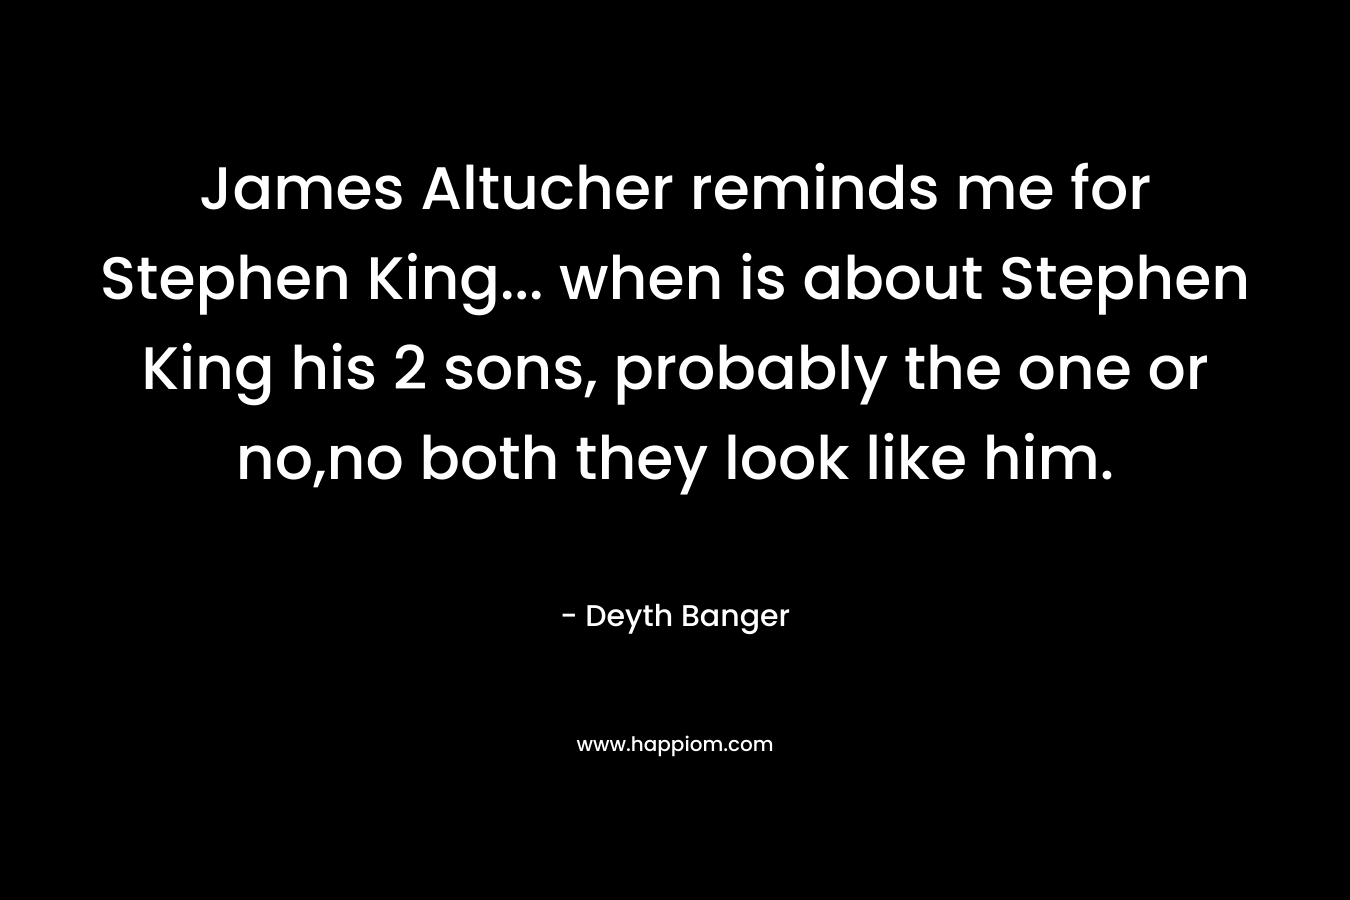 James Altucher reminds me for Stephen King... when is about Stephen King his 2 sons, probably the one or no,no both they look like him.